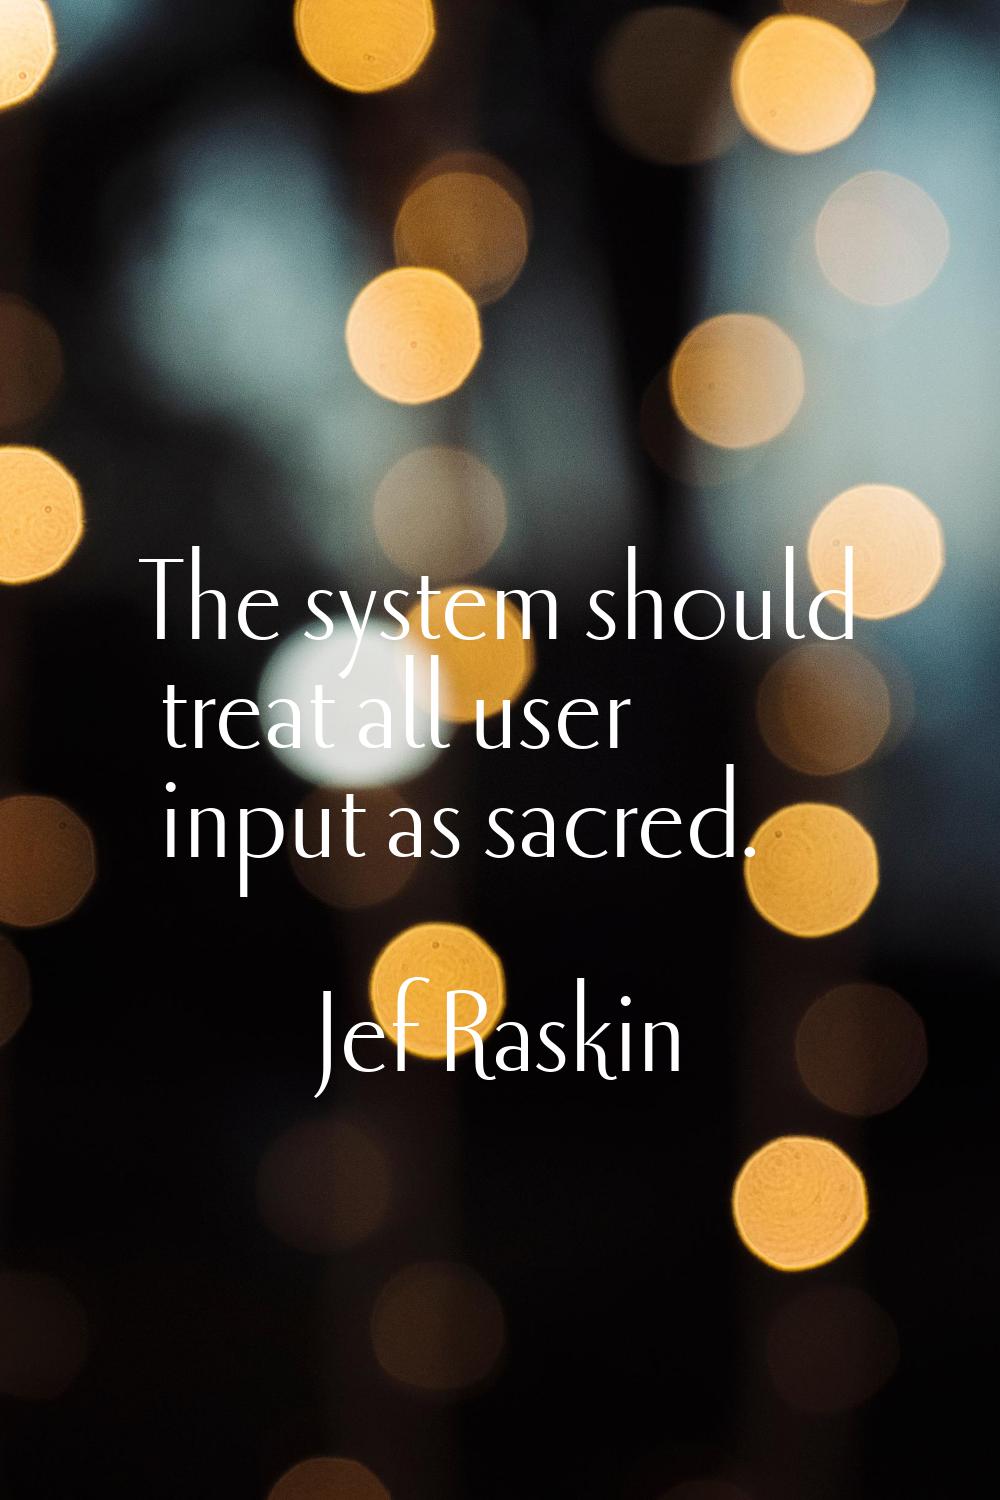 The system should treat all user input as sacred.